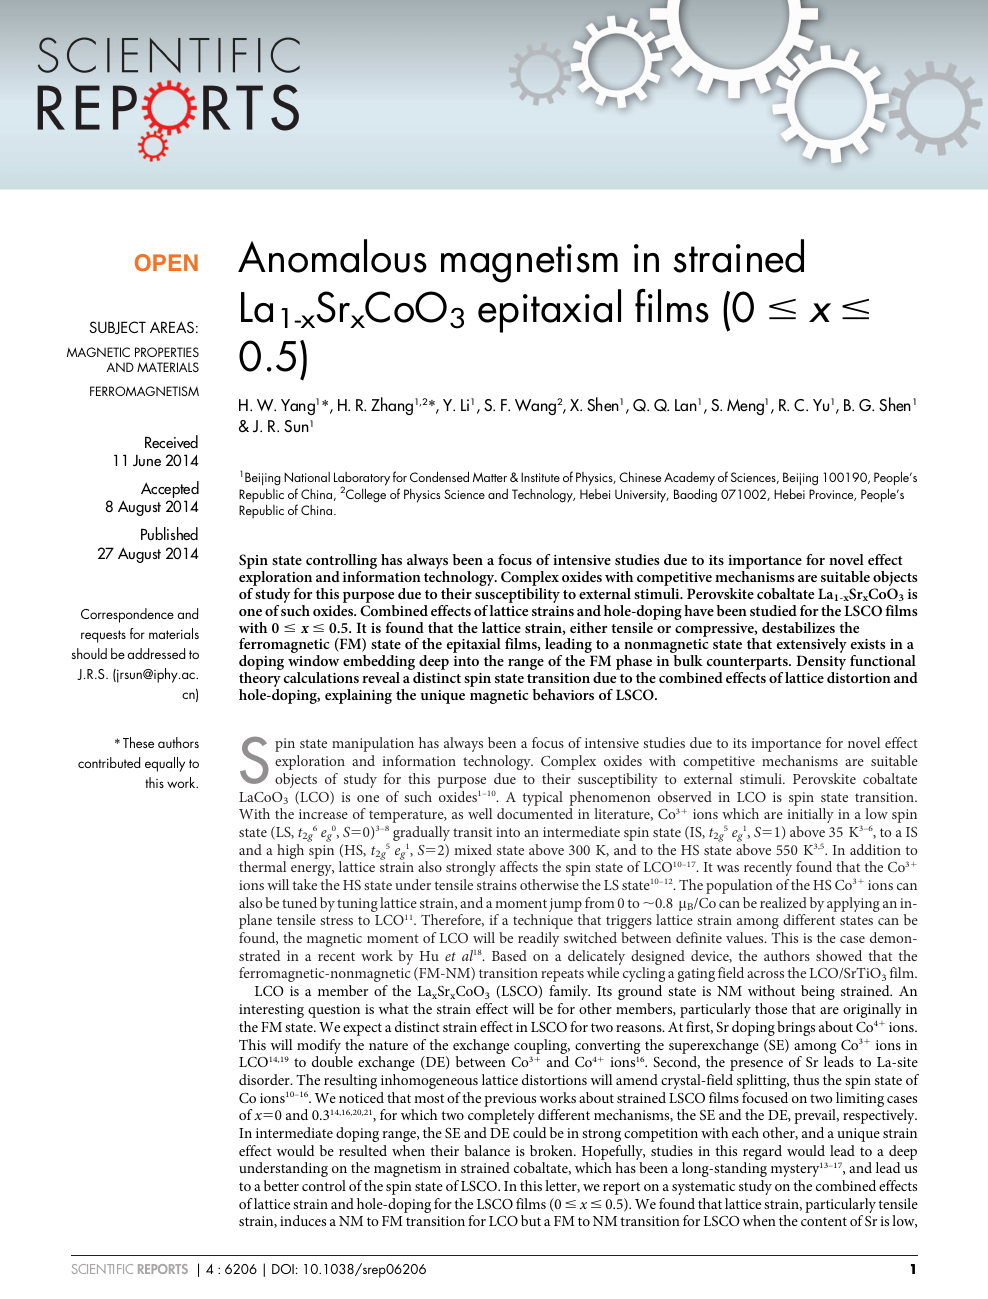 Anomalous Magnetism In Strained La1 Xsrxcoo3 Epitaxial Films 0 X 0 5 Topic Of Research Paper In Nano Technology Download Scholarly Article Pdf And Read For Free On Cyberleninka Open Science Hub